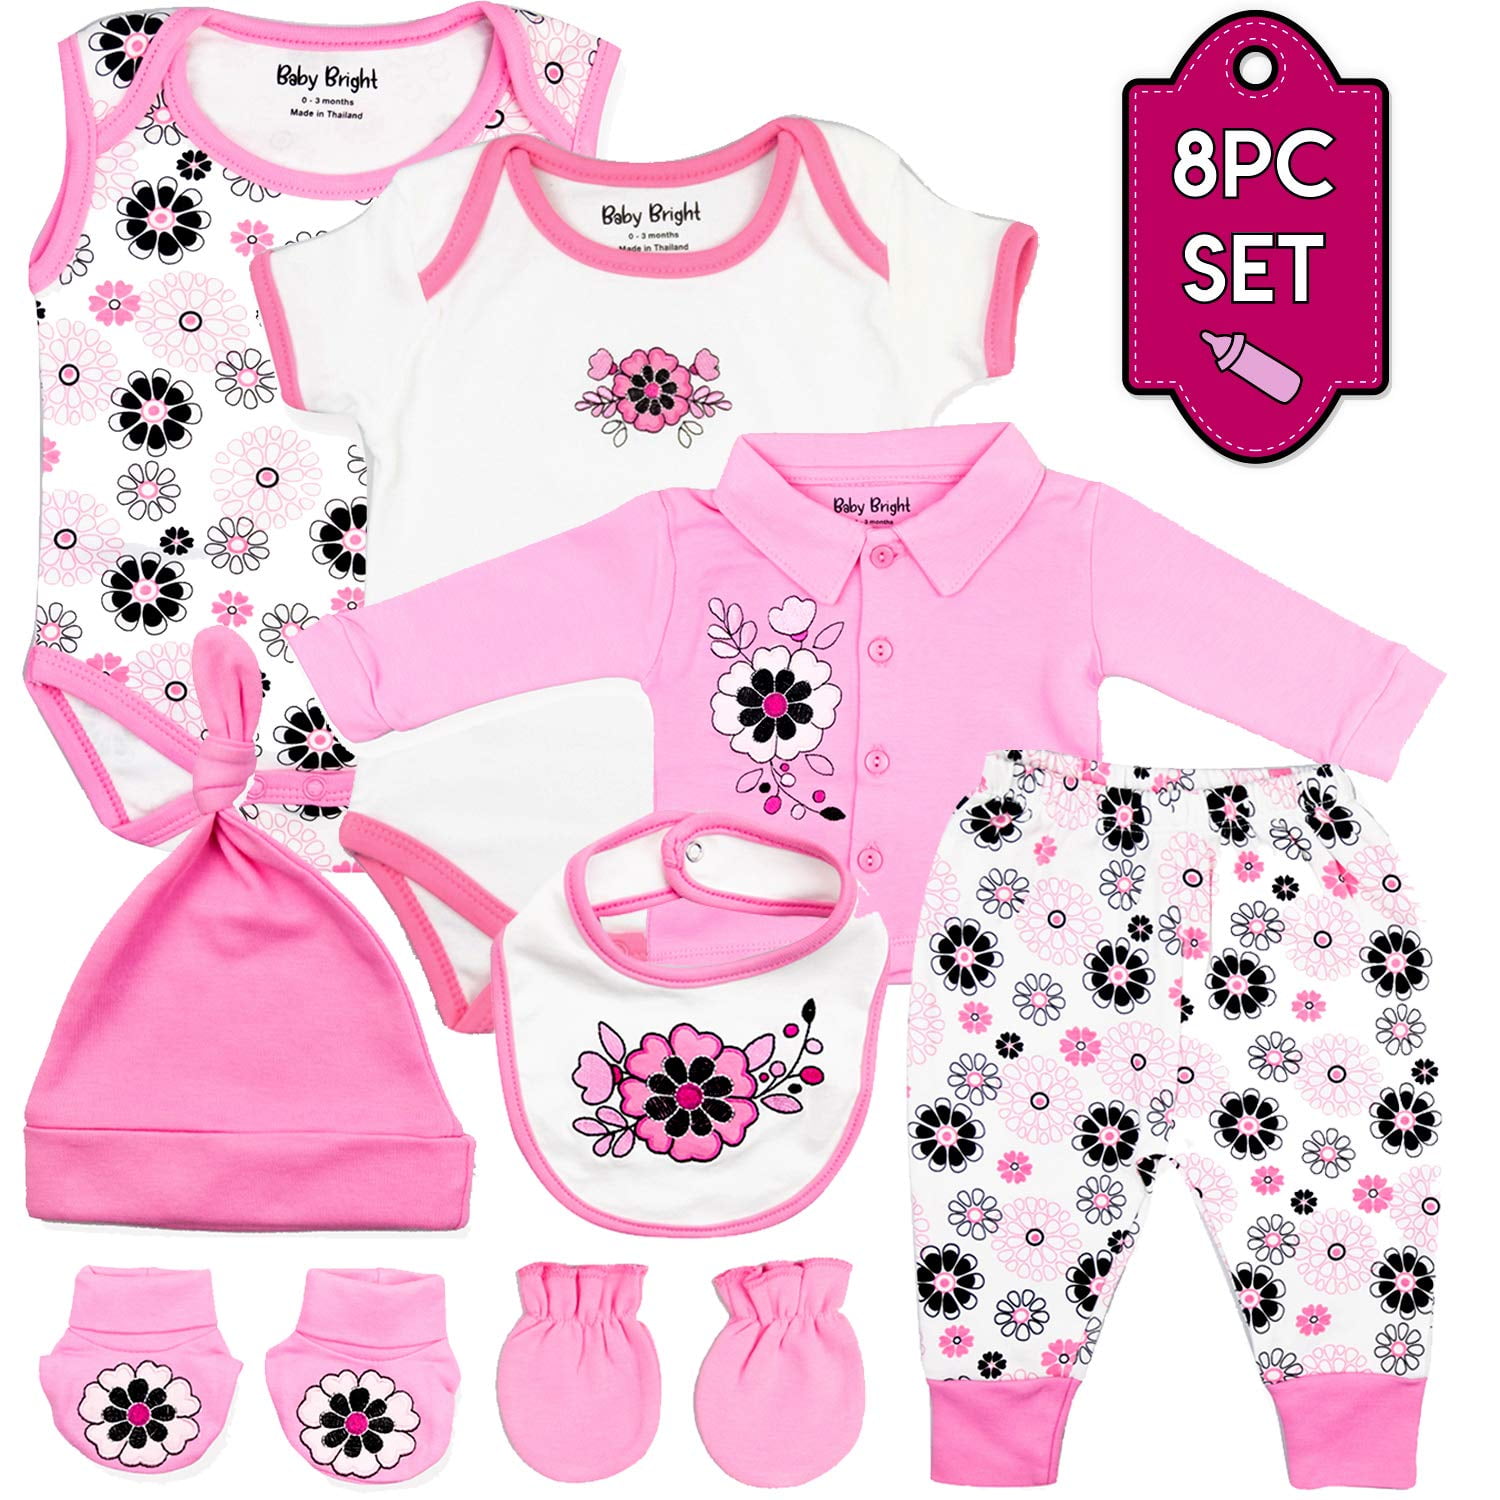 NEW Baby Girls 2 Pc Layette Set 0-3 Months Top Shirt Hat Outfit Princess Pink 